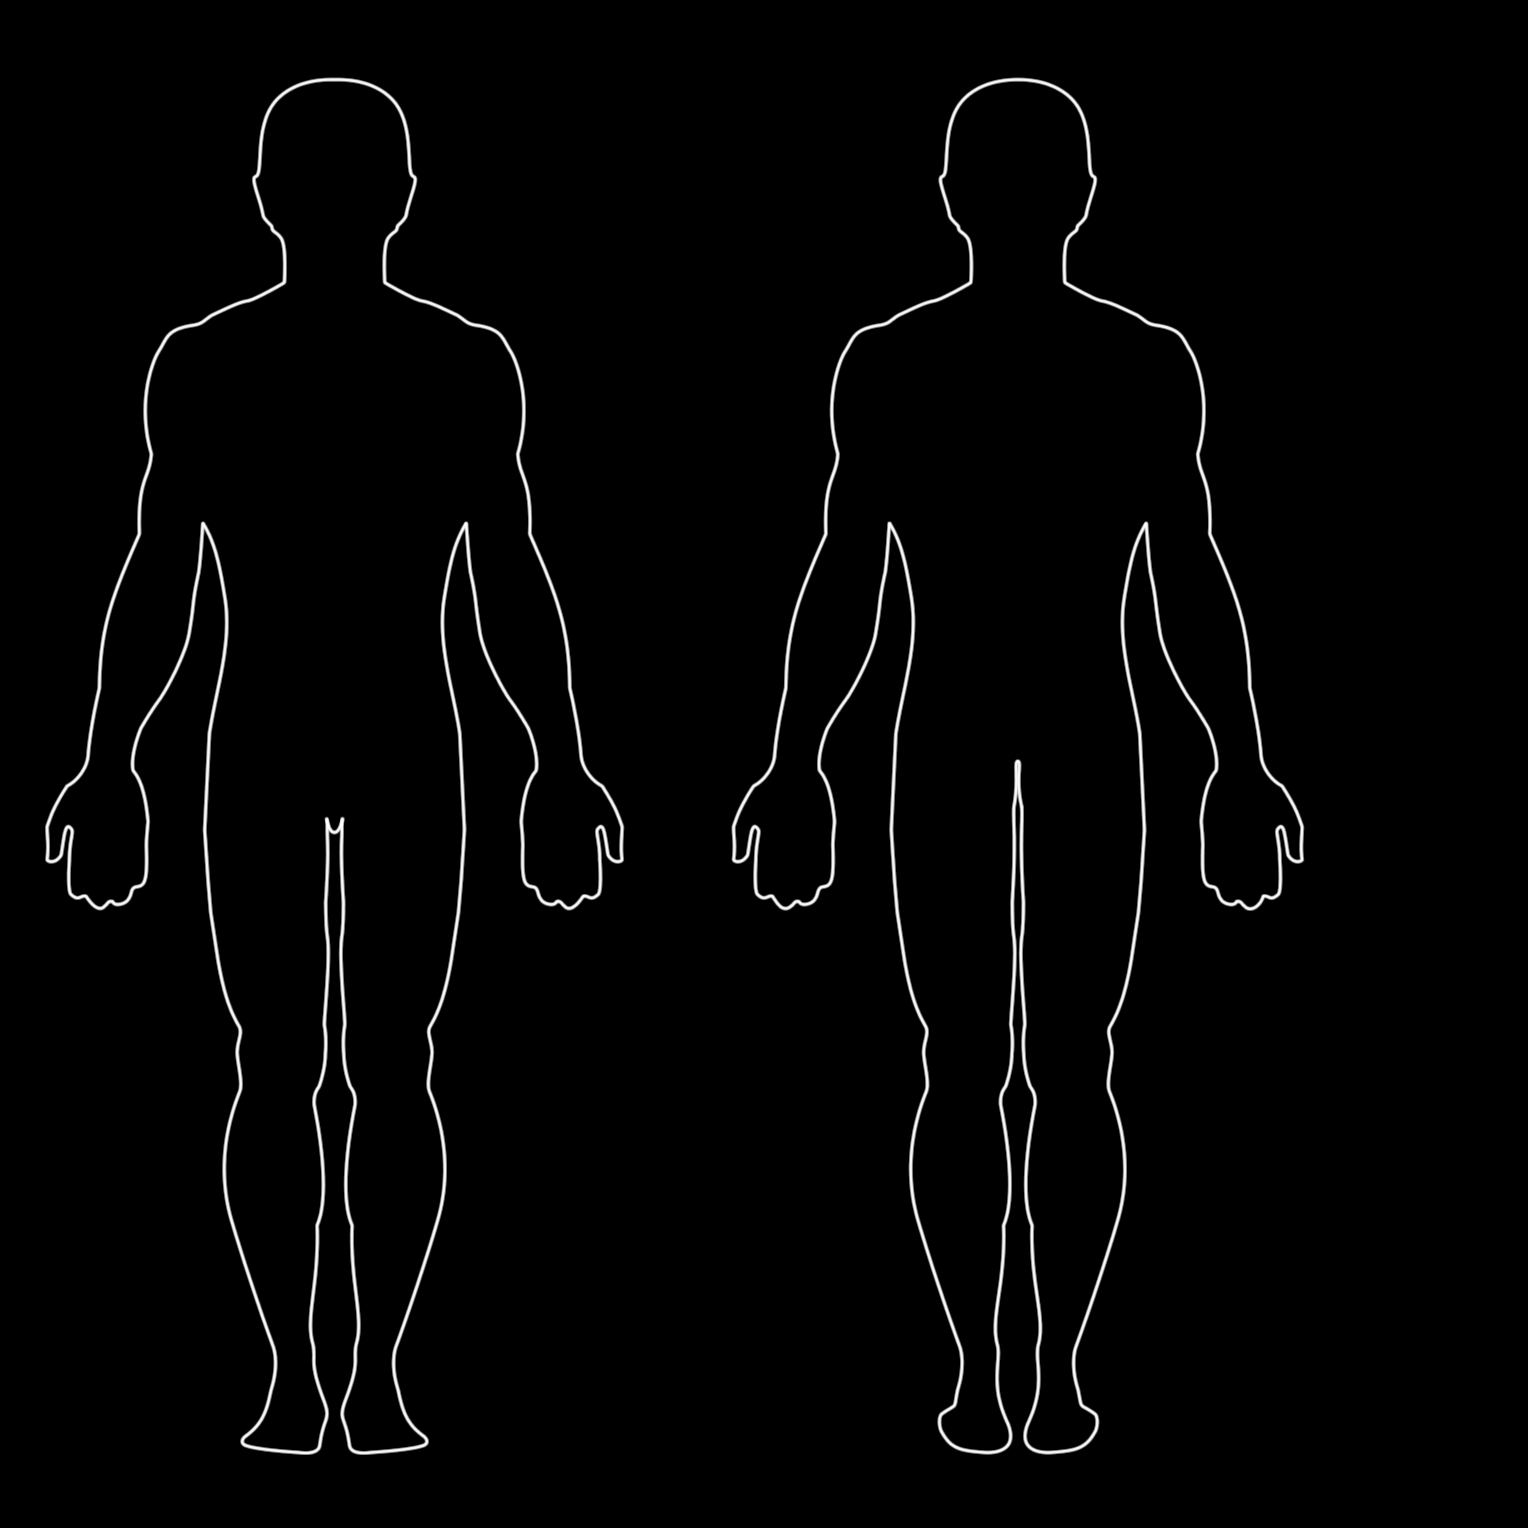 Free Human Outline Template Download Free Clip Art Free Clip Art On Clipart Library Discover 91 free body outline png images with transparent backgrounds. clipart library